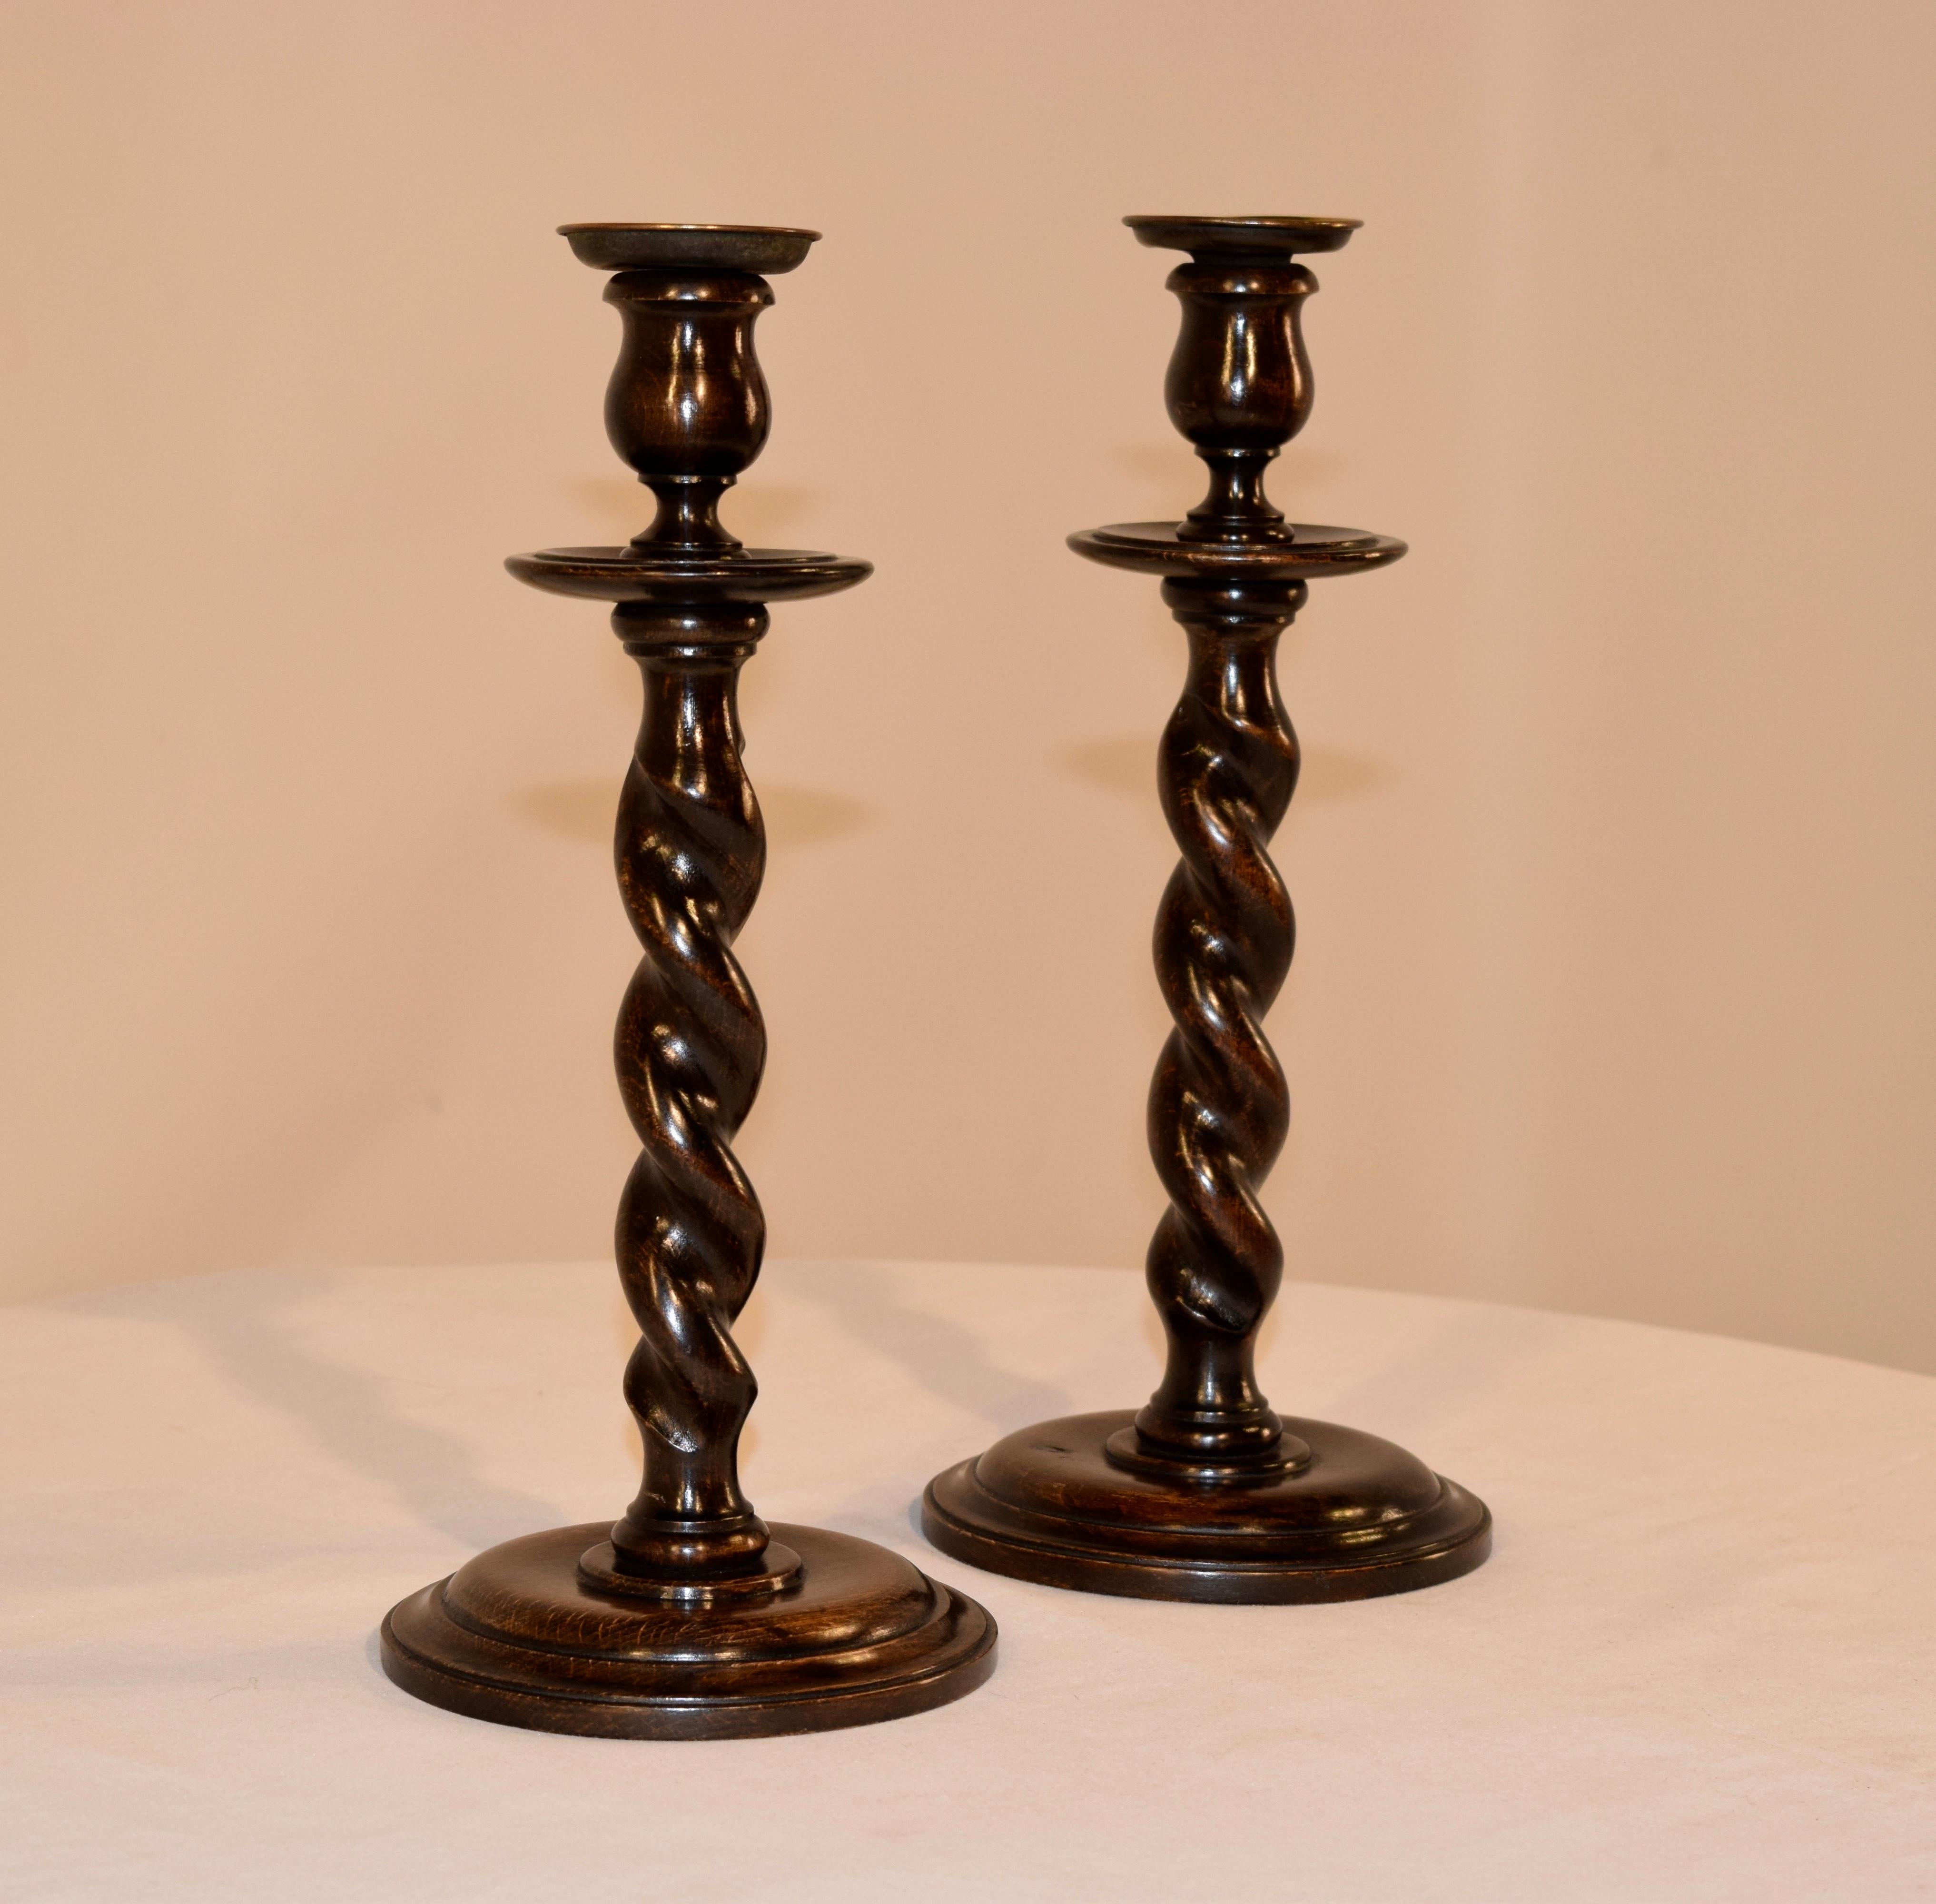 Turned Pair of 19th Century English Candlesticks